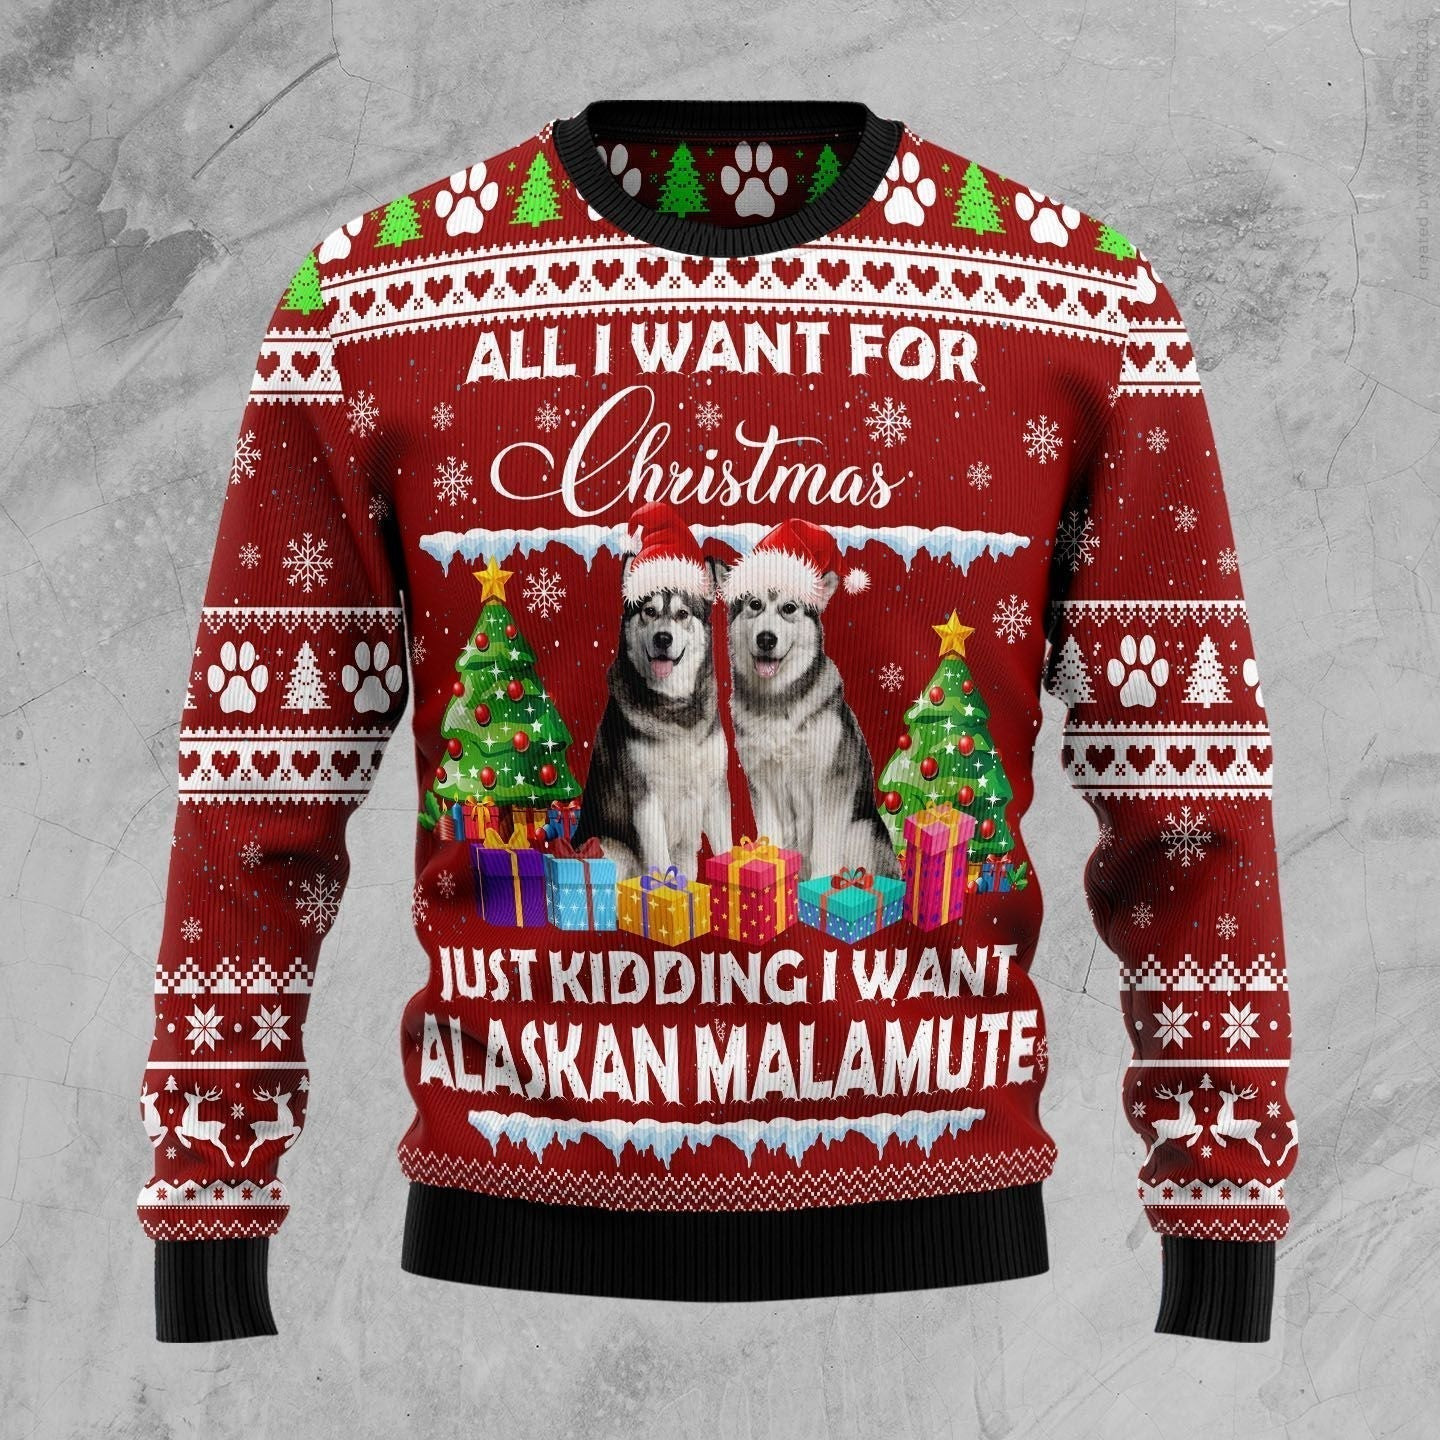 Alaskan Malamute Is All I Want For Xmas Ugly Christmas Sweater, Ugly Sweater For Men Women, Holiday Sweater